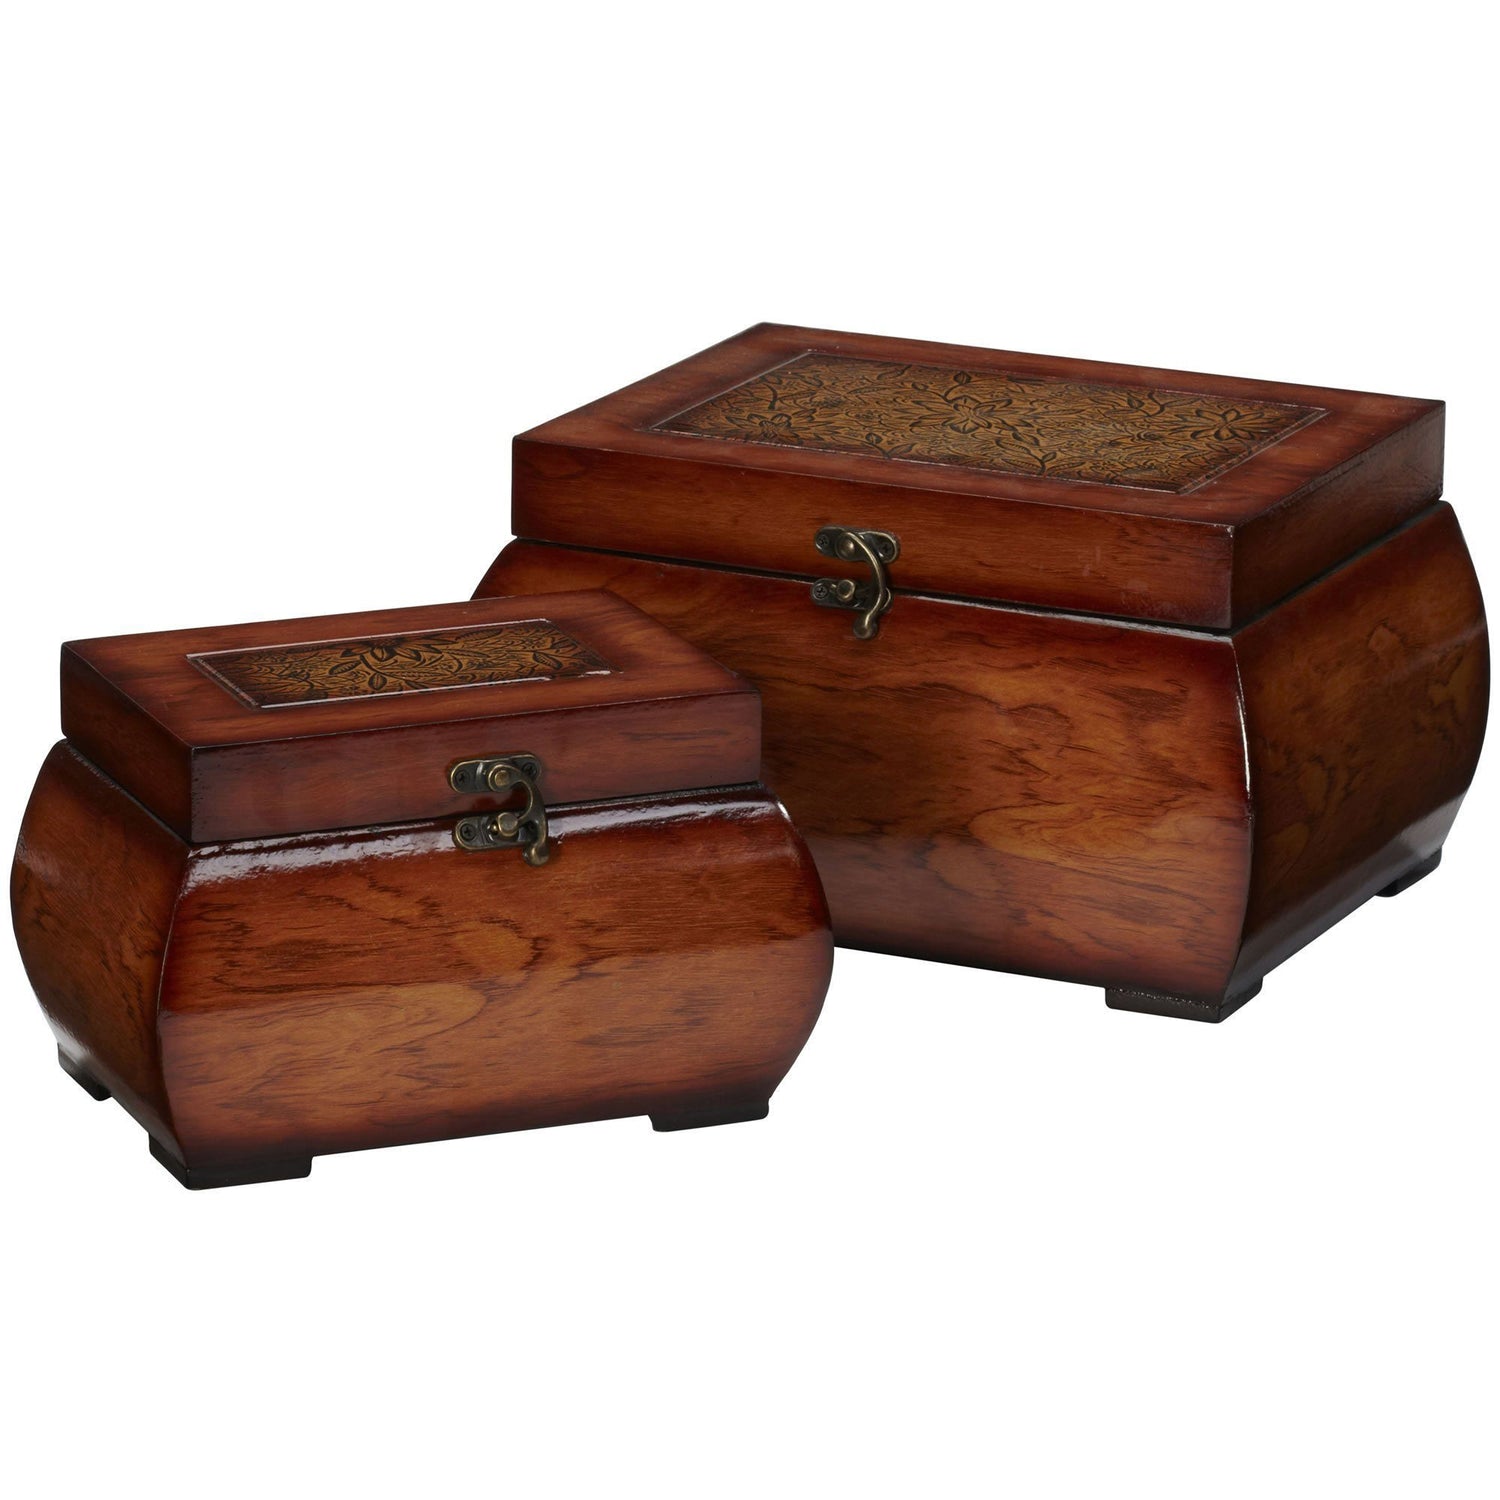 Decorative Lacquered Wood Chests (Set of 2)